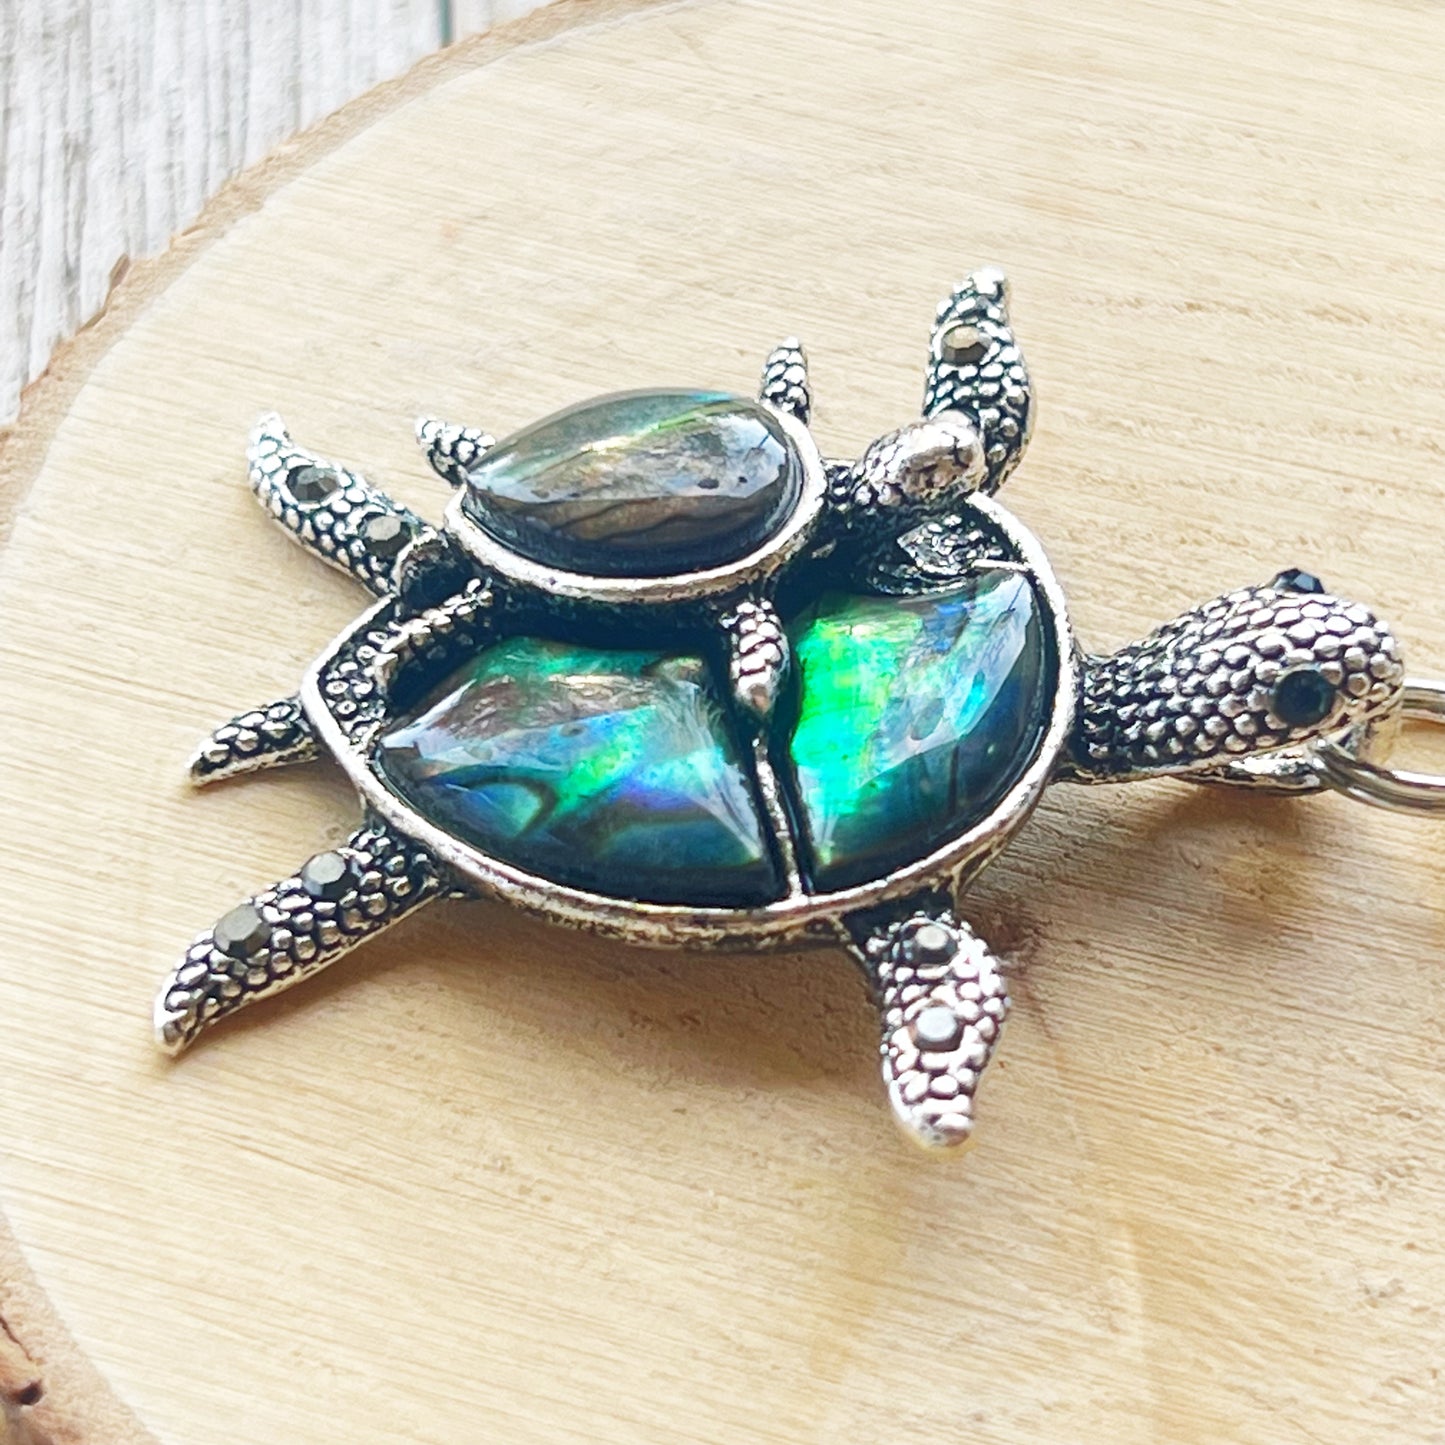 Turtle with Baby Zipper Pull Keychain Purse Charm with Natural Abalone - Adorable Coastal-Inspired Accessory